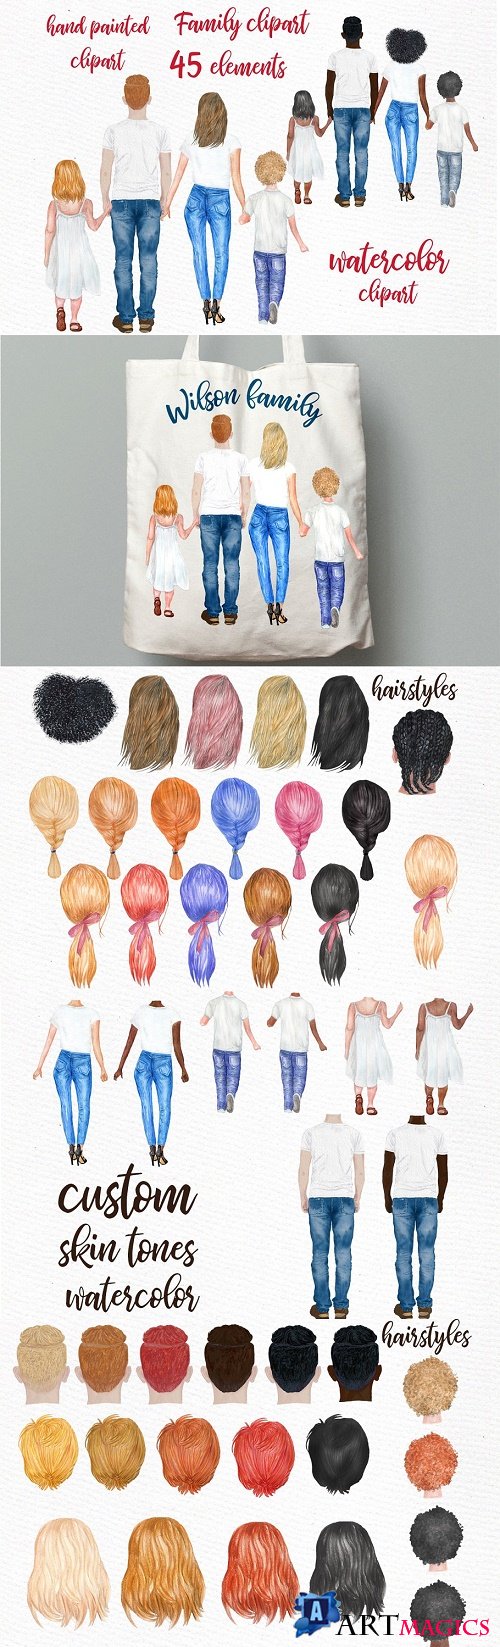 Family clip art Watercolor people - 3813731